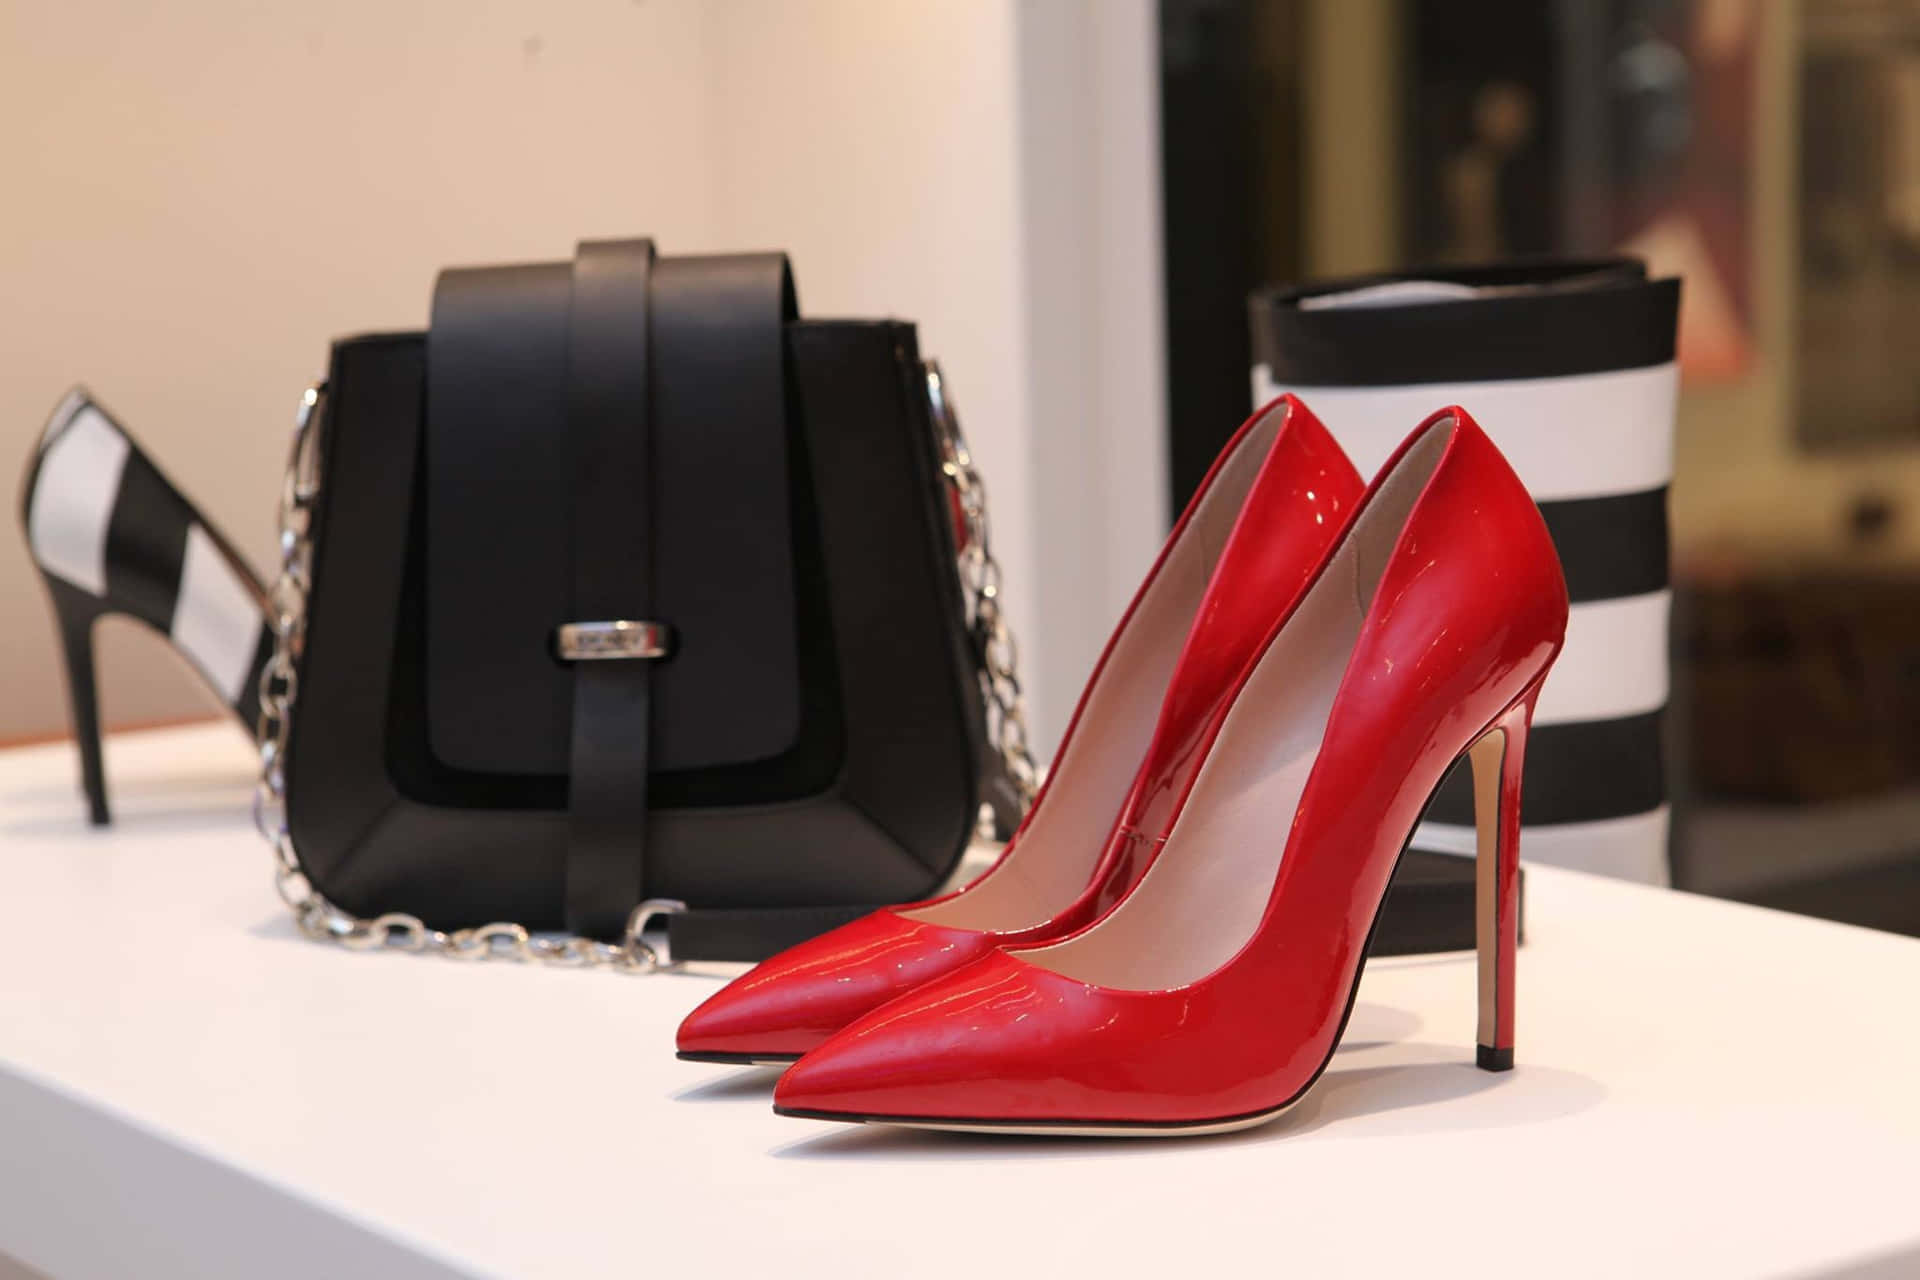 Red High Heel Pumps With Black Purse On Display